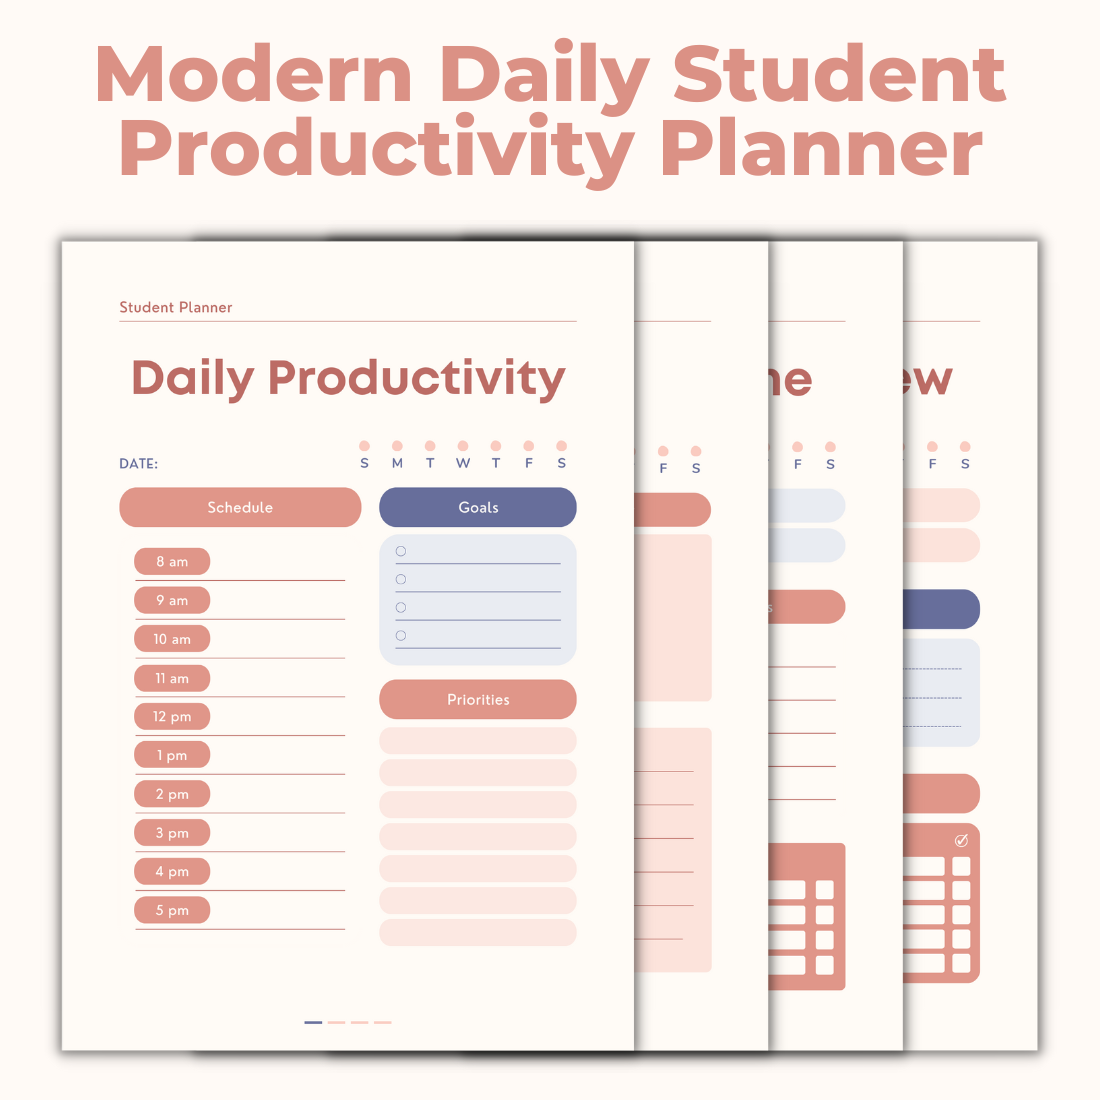 Modern Daily Student Productivity Planner Template cover image.